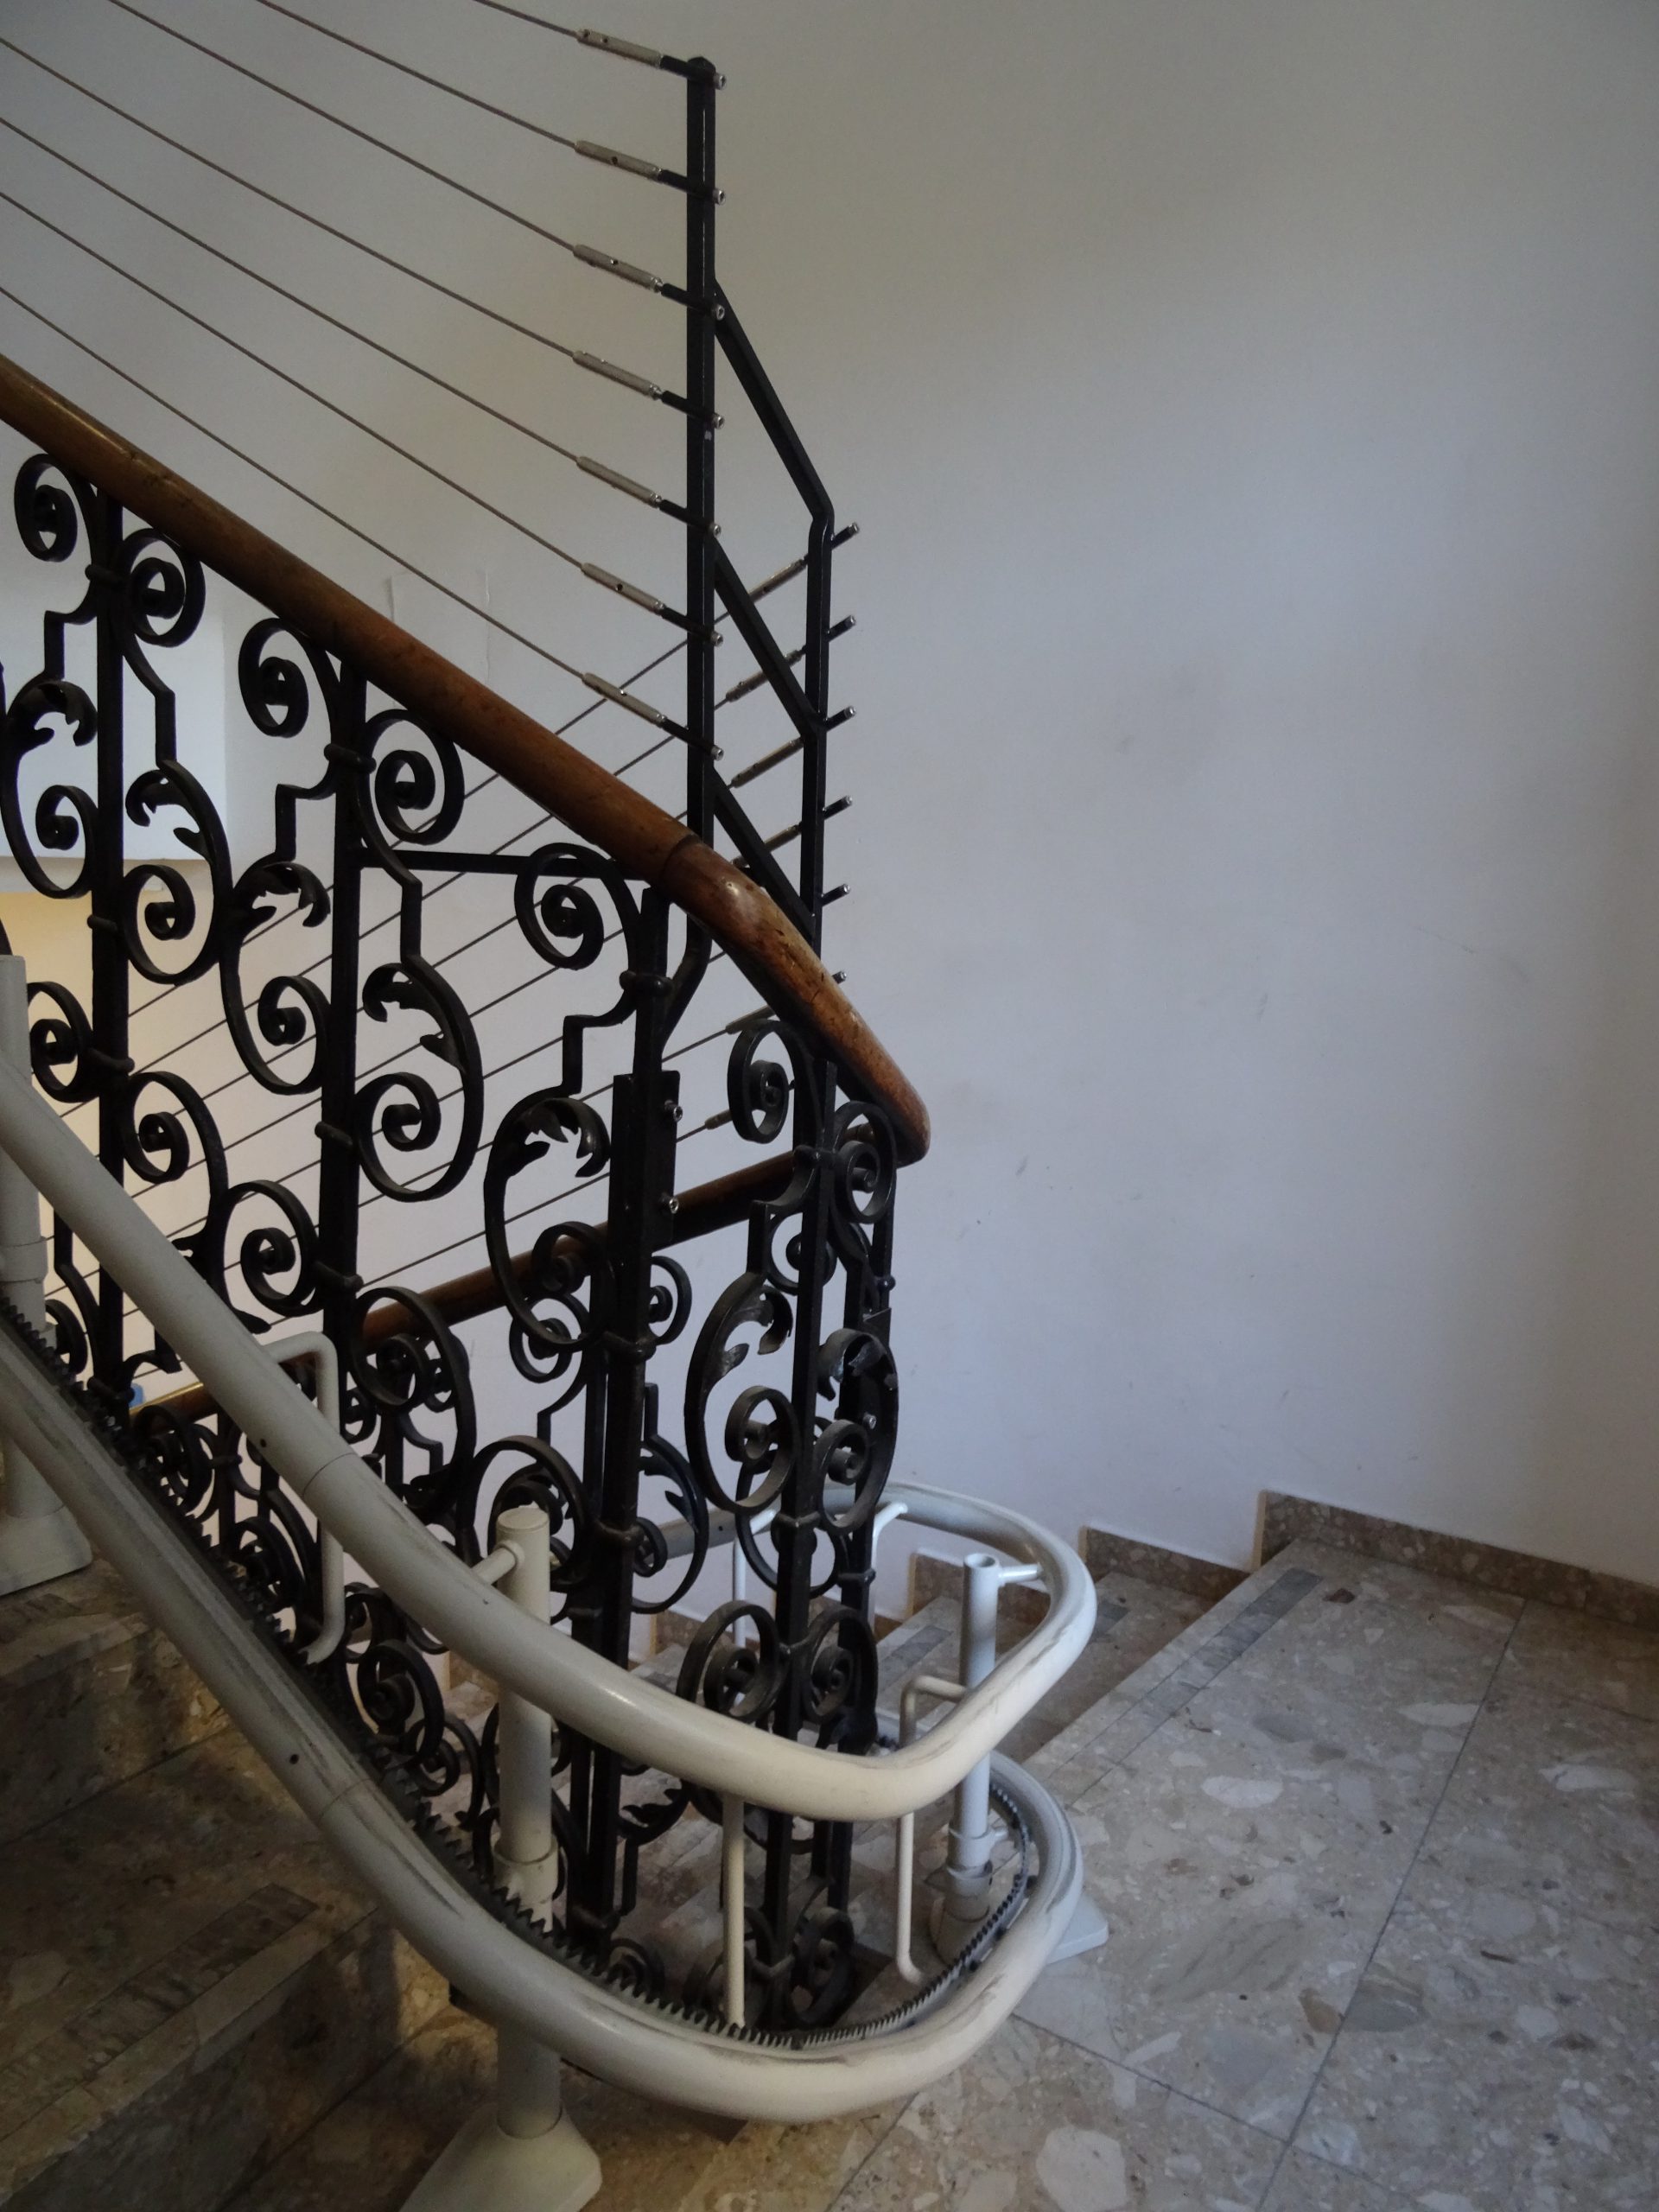 Stairwell with handrail